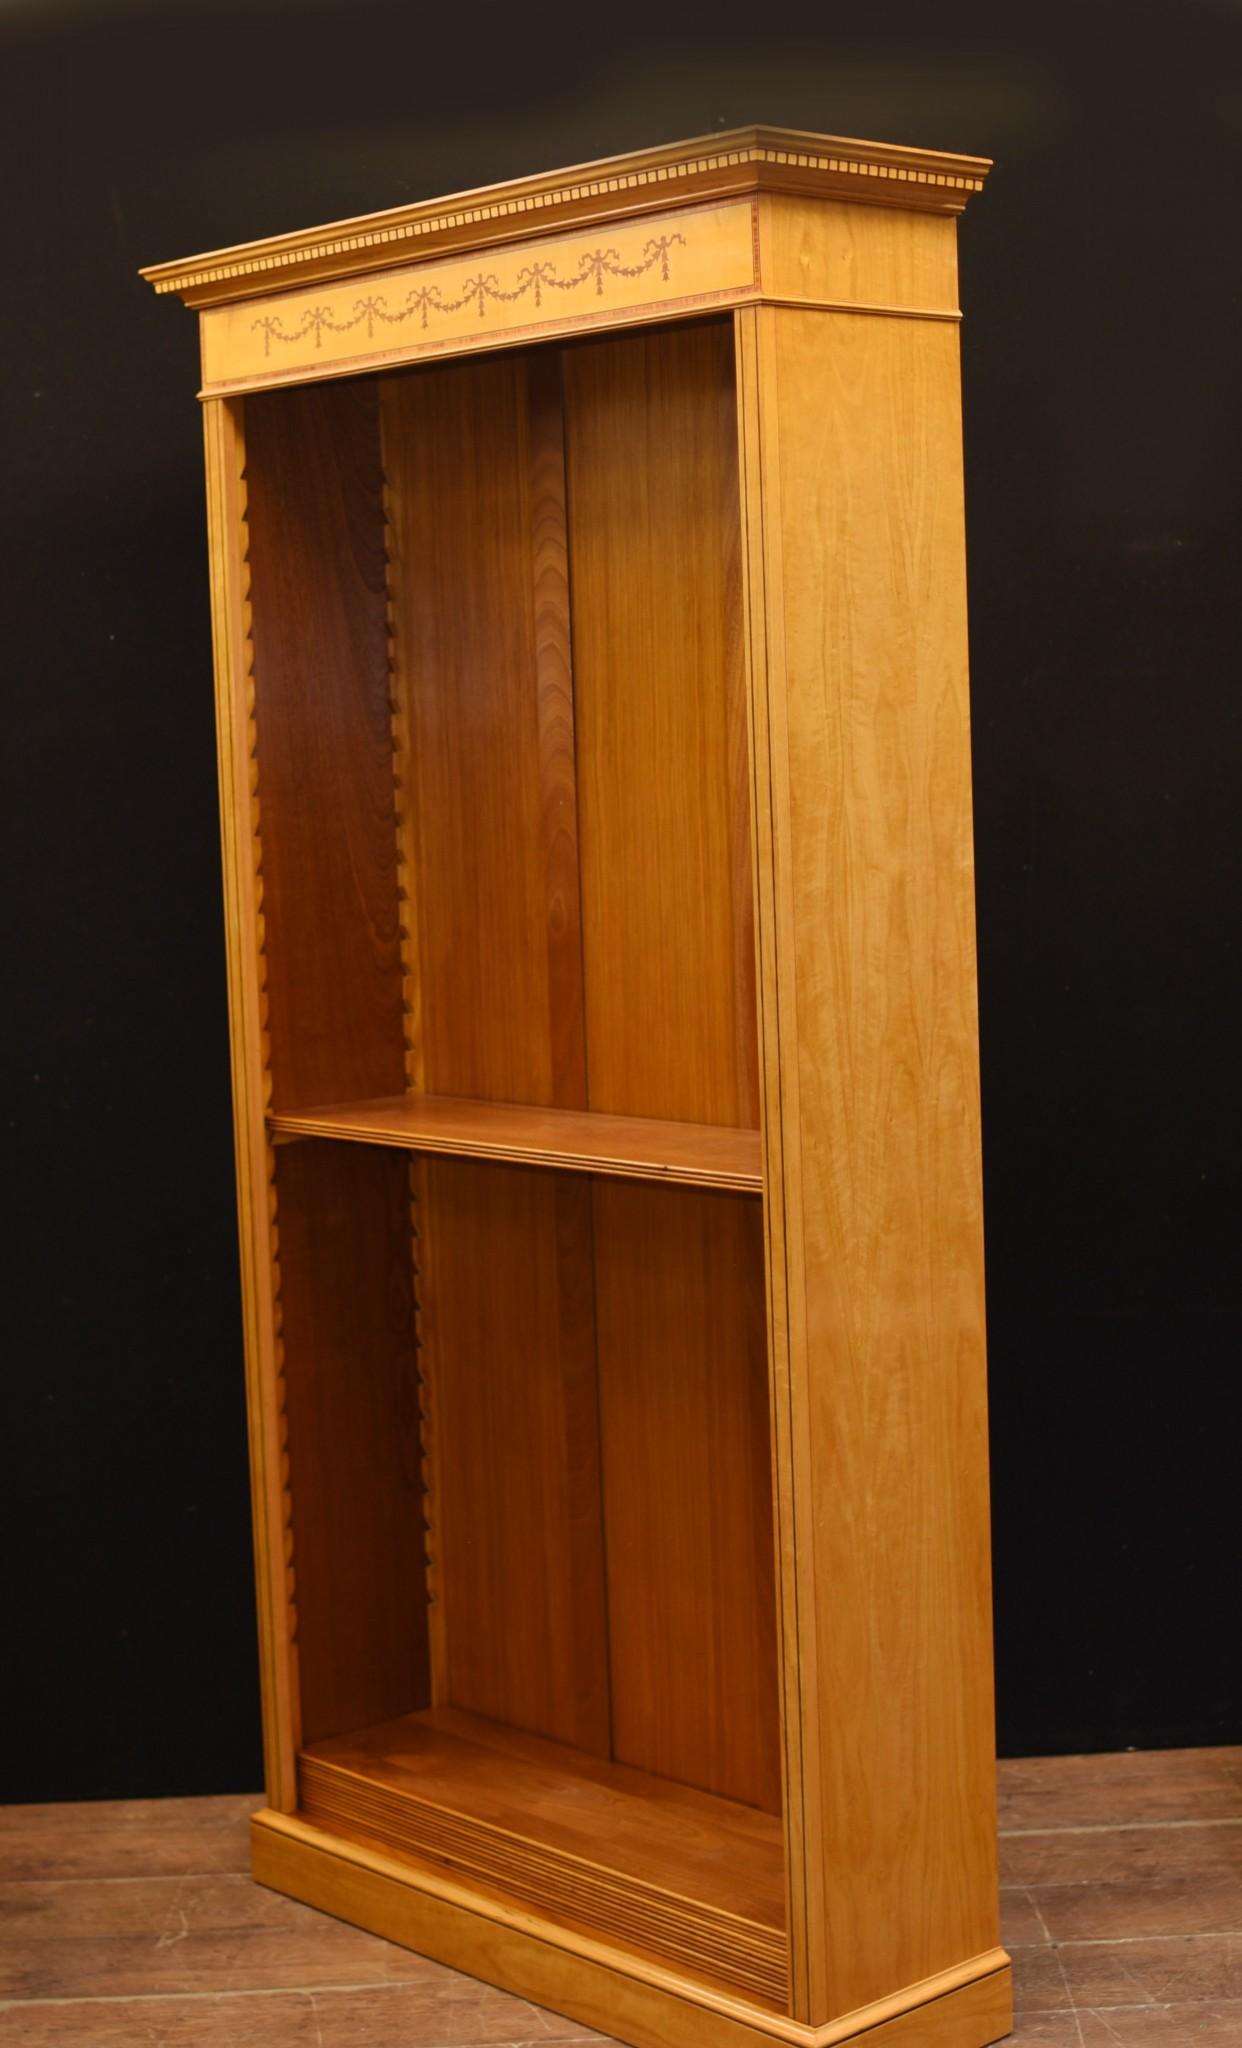 Regency Open Bookcase - Satinwood Sheraton Bookcases For Sale 1